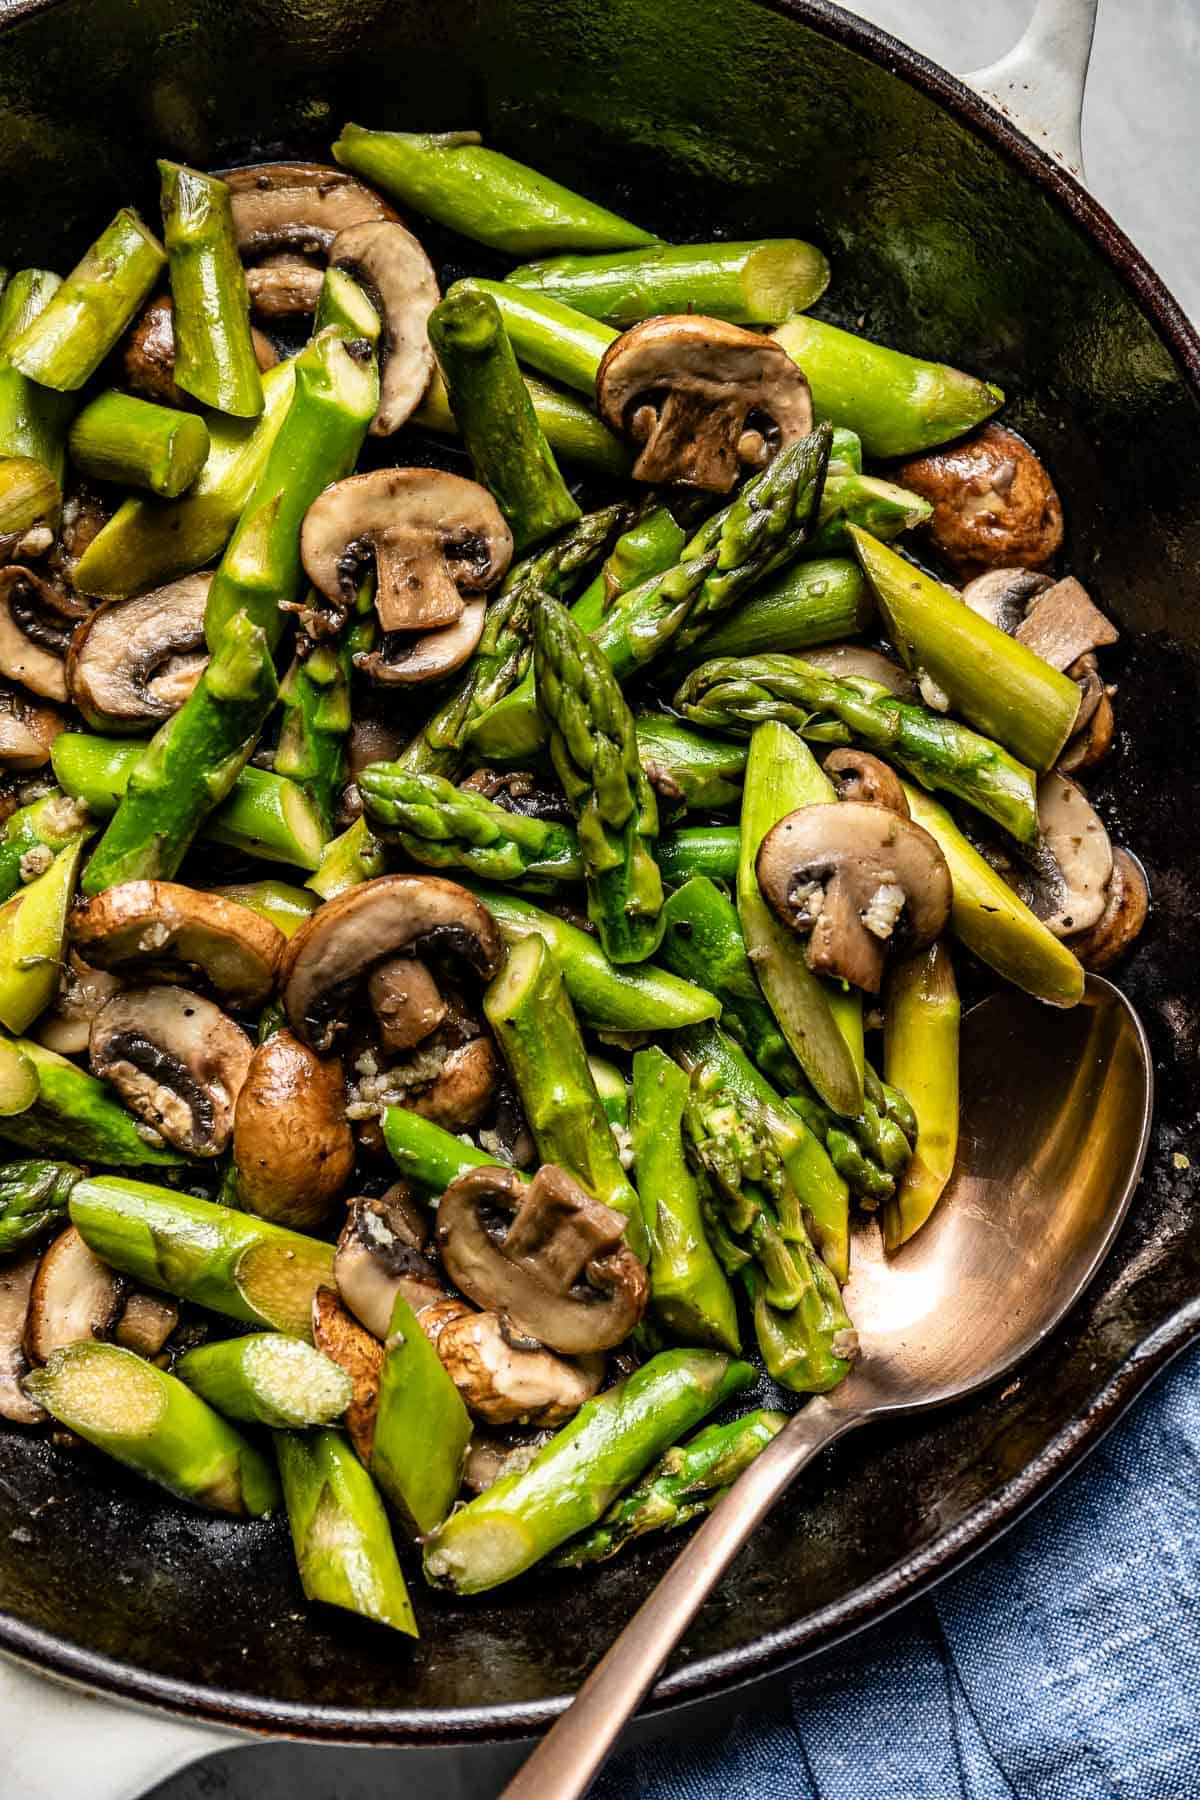 sautéed mushroom and asparagus in a cast iron skillet with a wooden spoon on the side